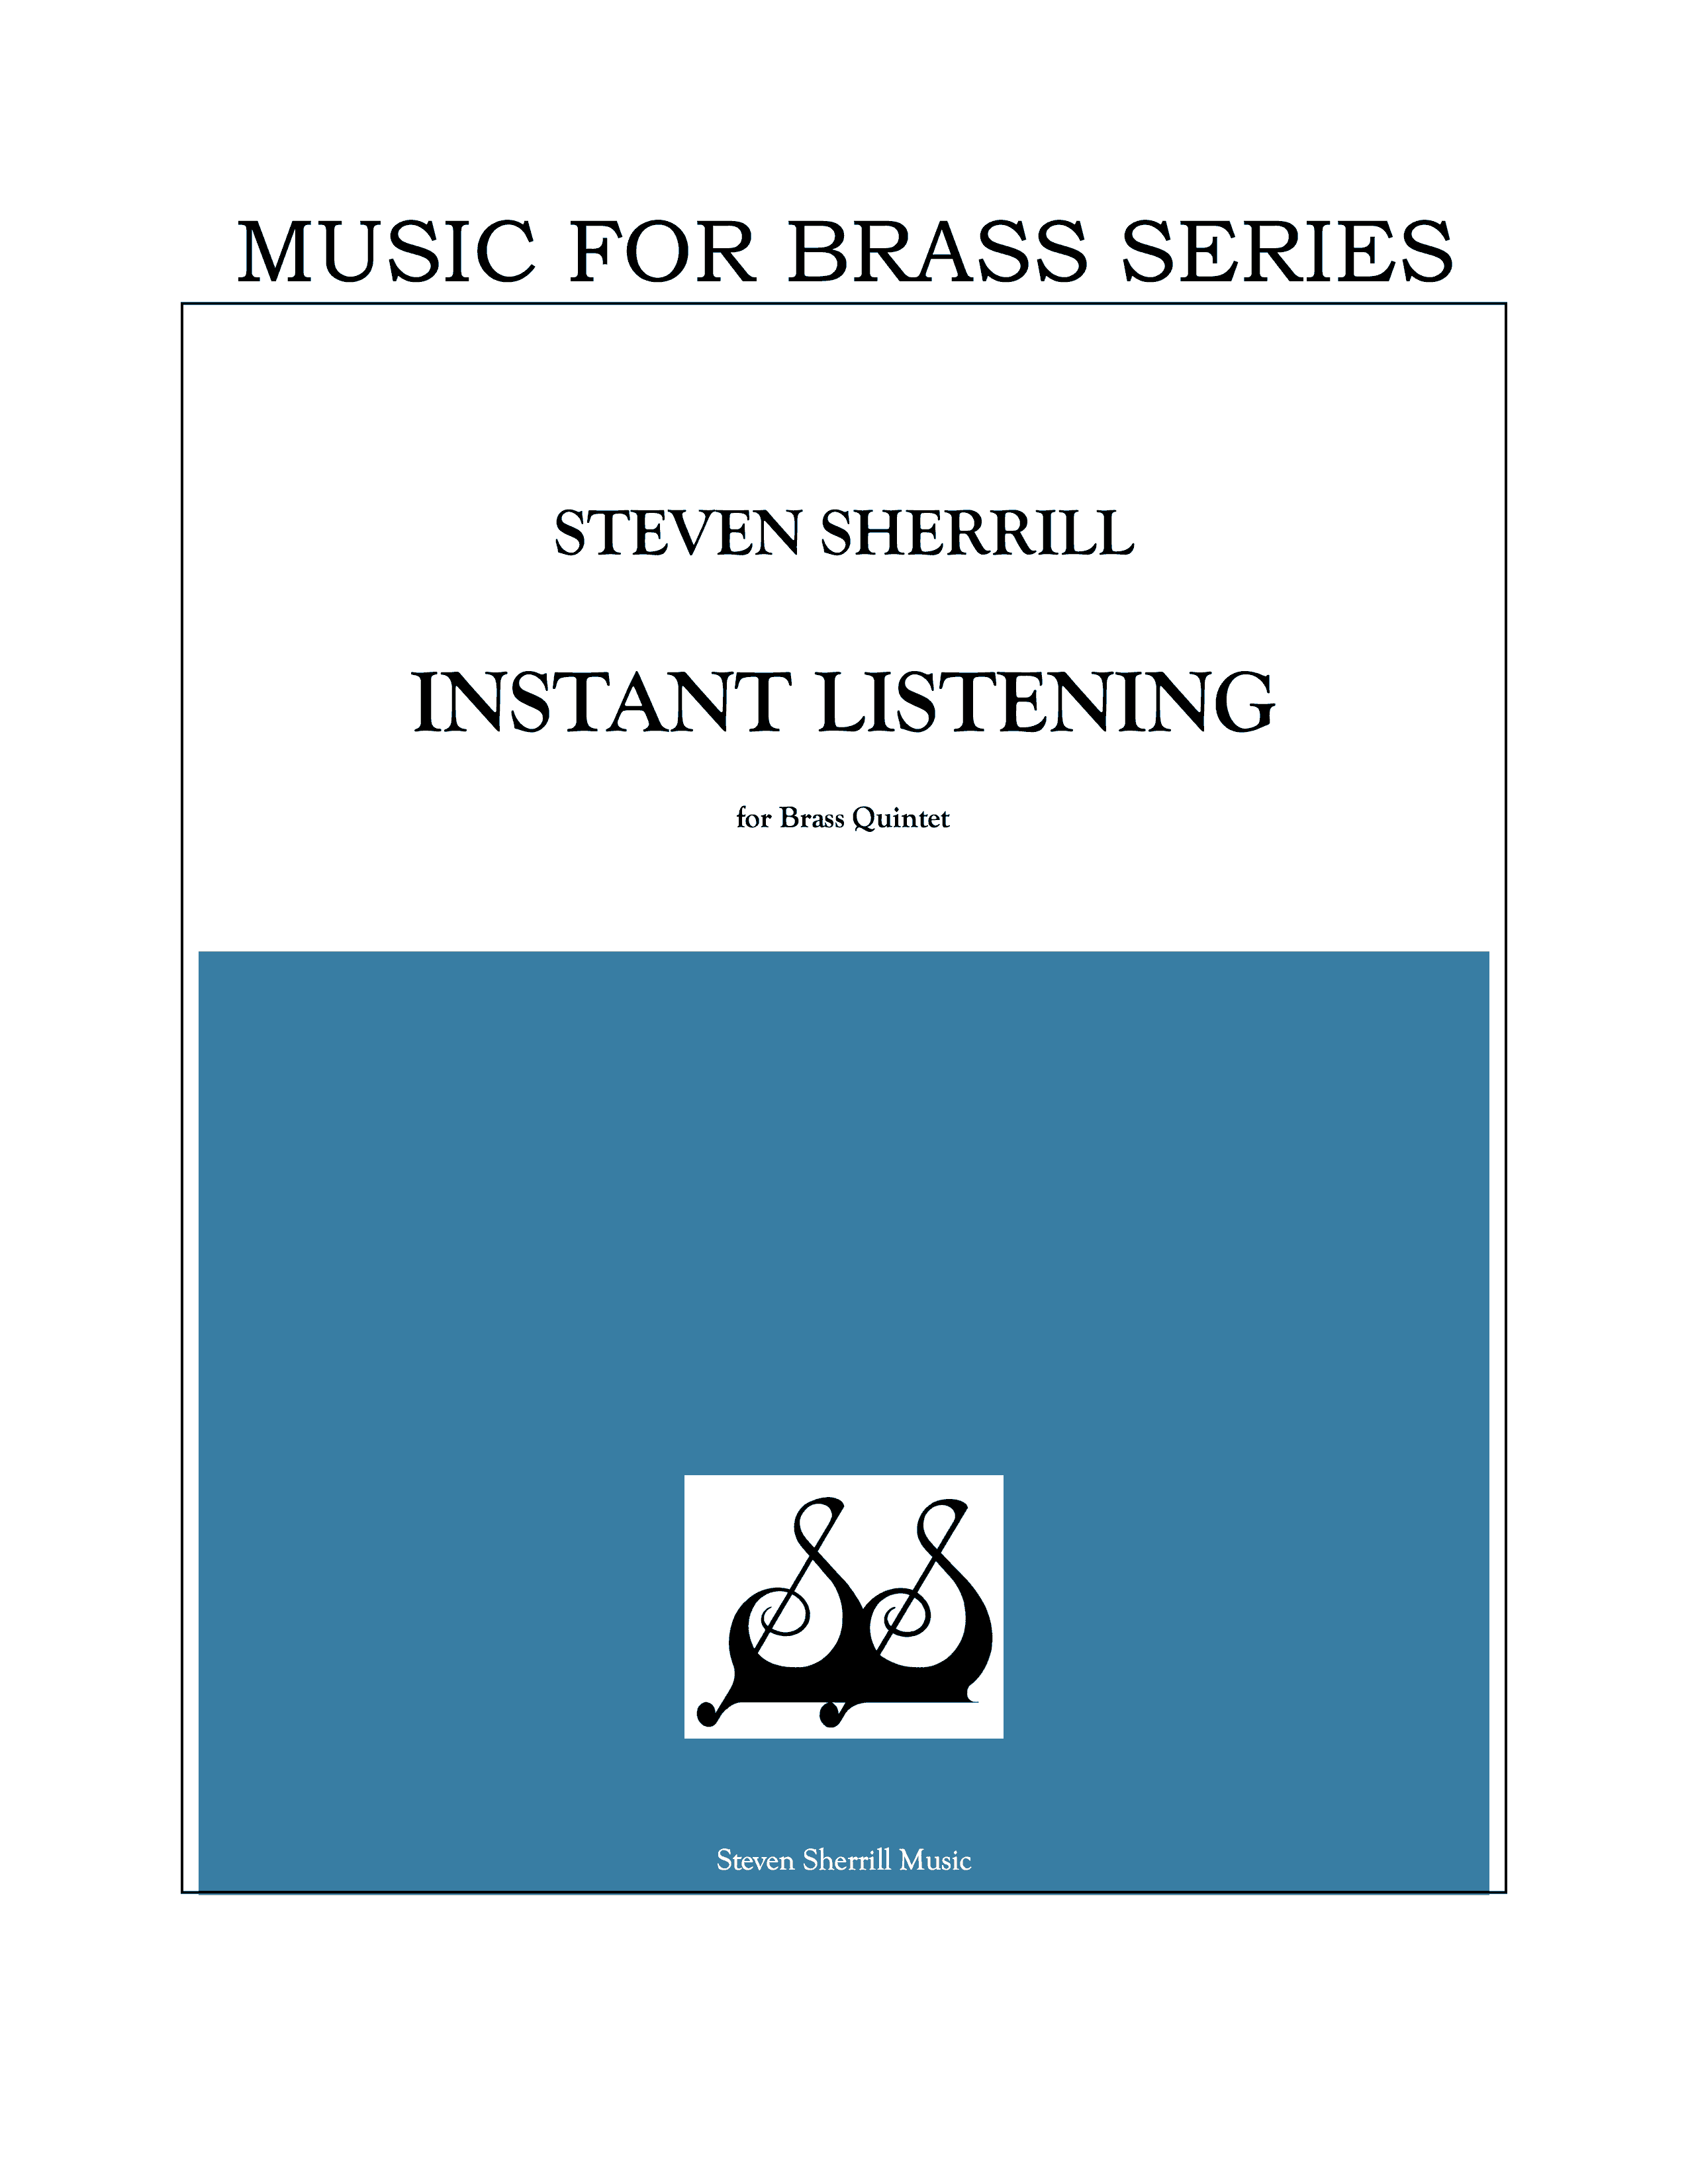 Instant Listening cover page